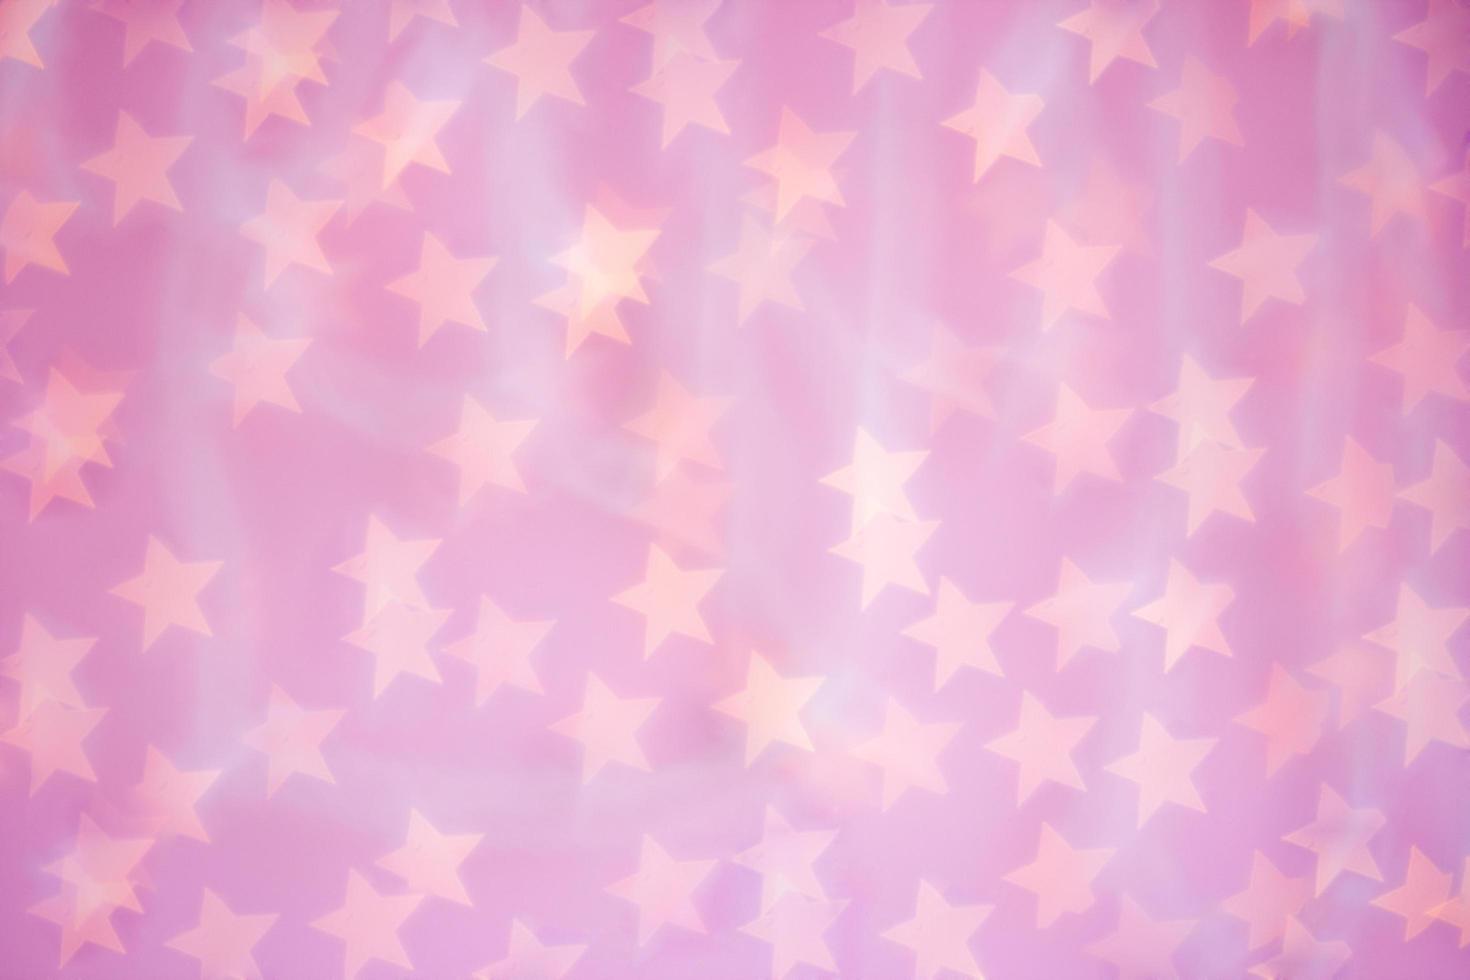 Abstract pink blurred background with shine lights stars. Texture with bokeh effect in de-focused. Decorations concept for design, display, holiday photo